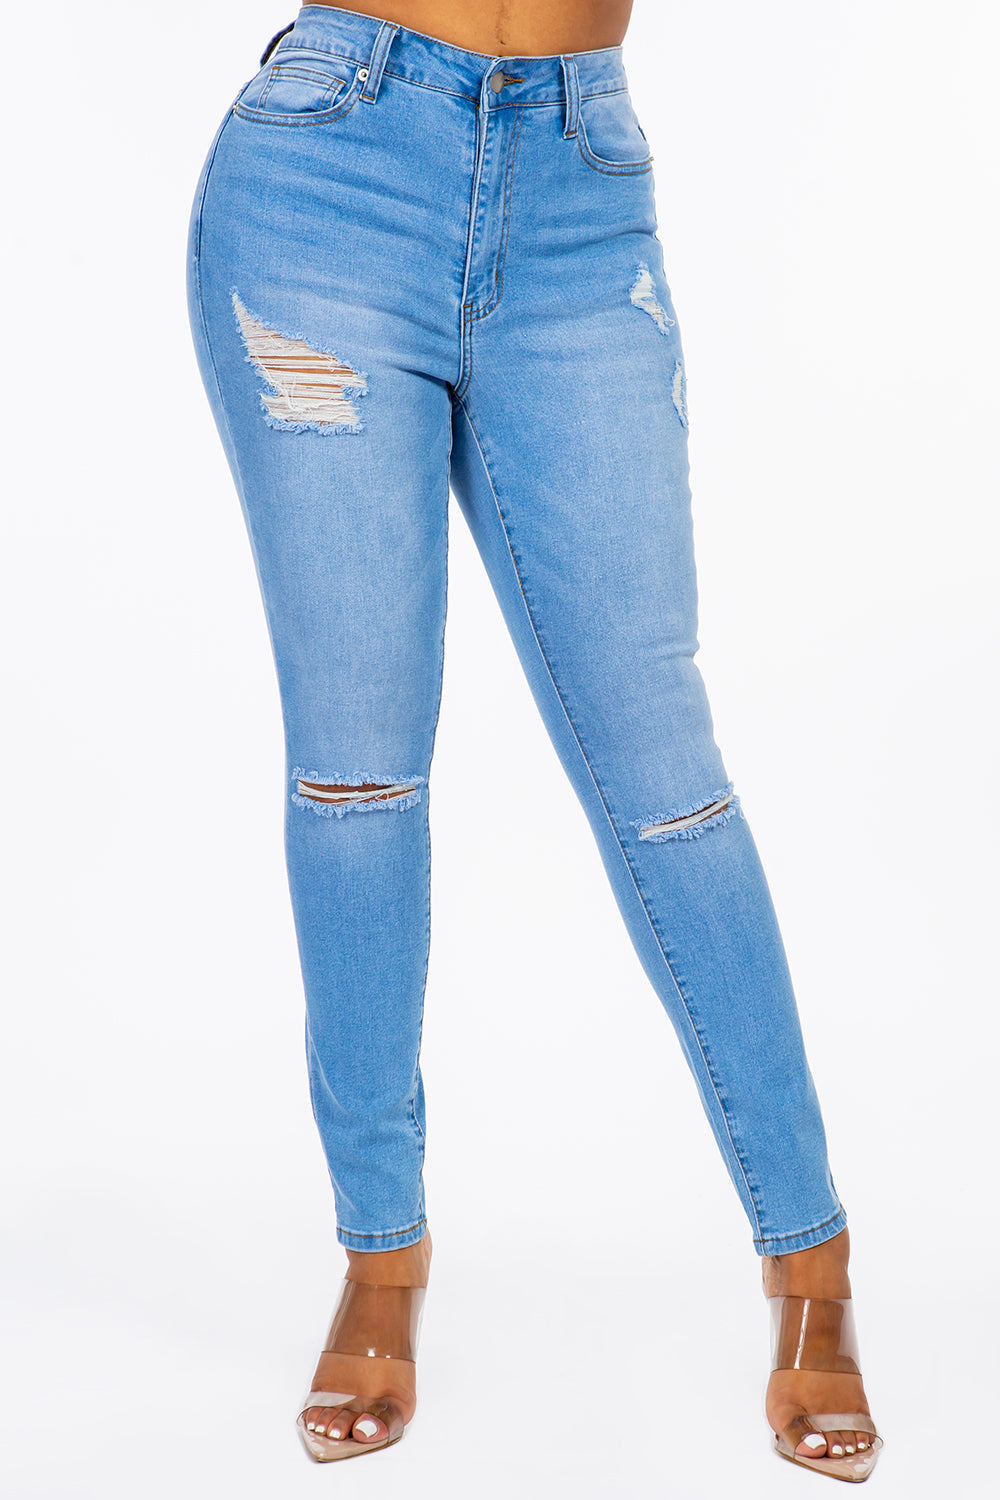 Extreme Stretch Distressed High Rise Skinny Jeans Dark YH2212